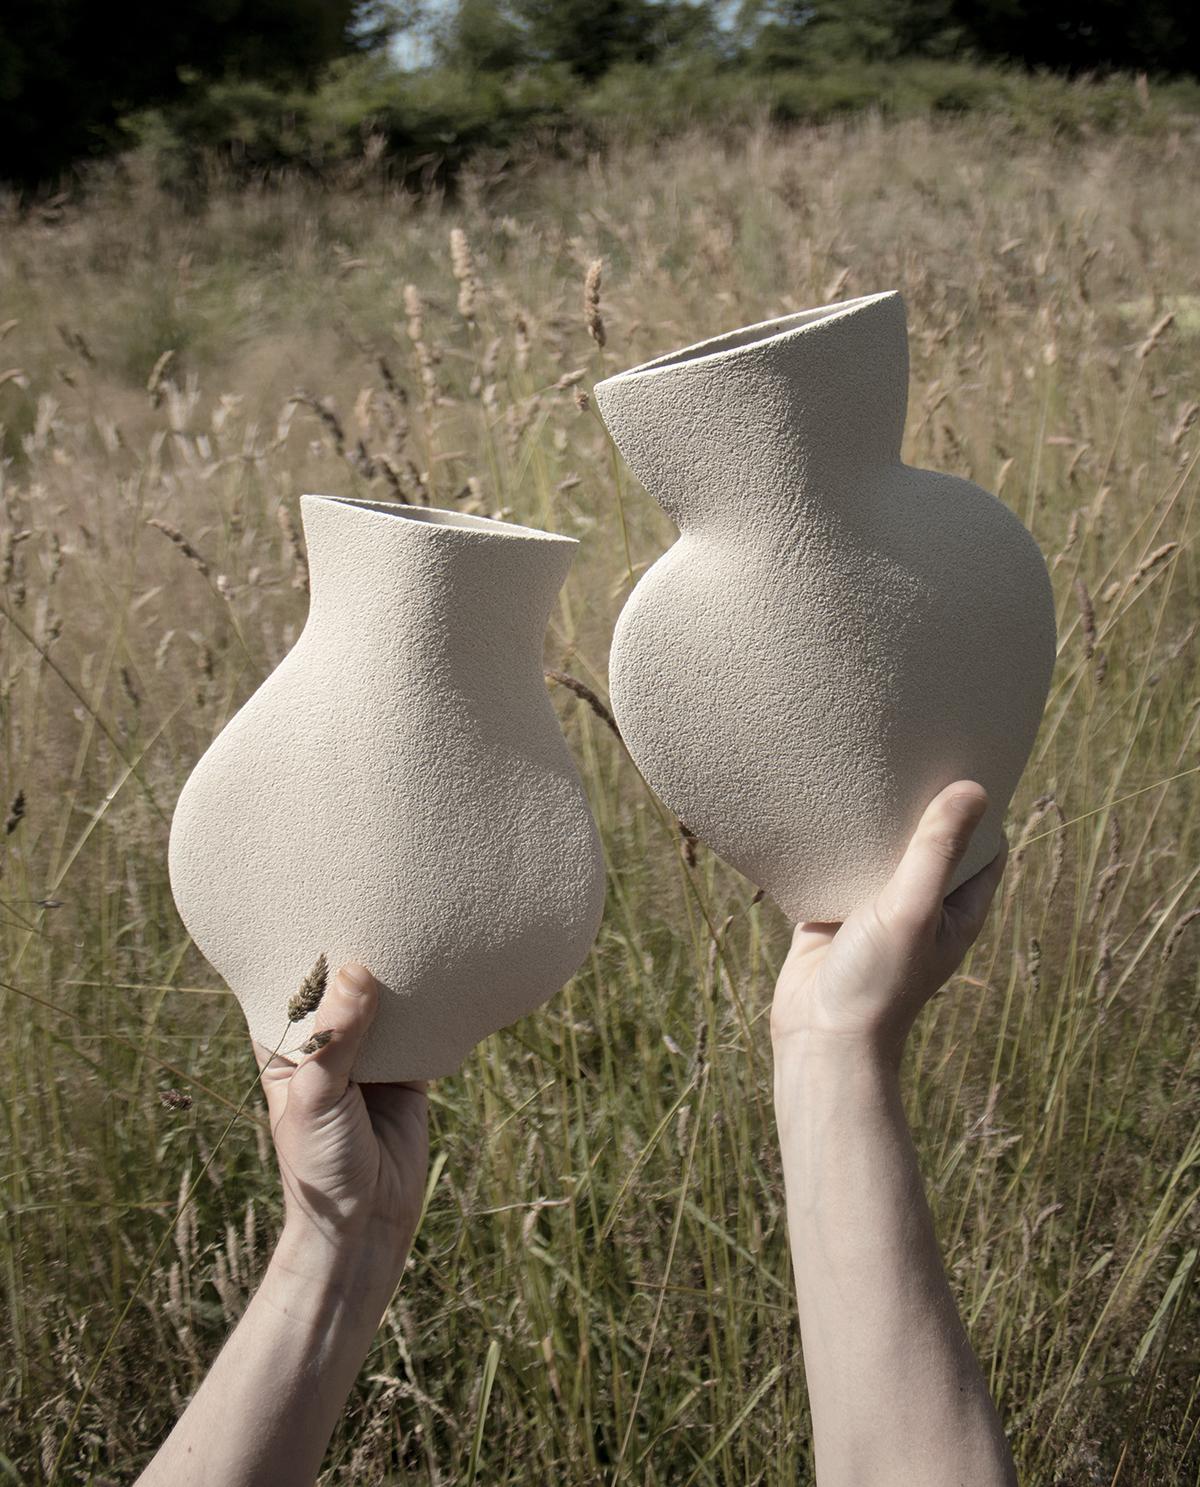 21st Century Jarre Vase in White Ceramic, Hand-Crafted in France In New Condition For Sale In Marchaux-Chaudefontaine, FR